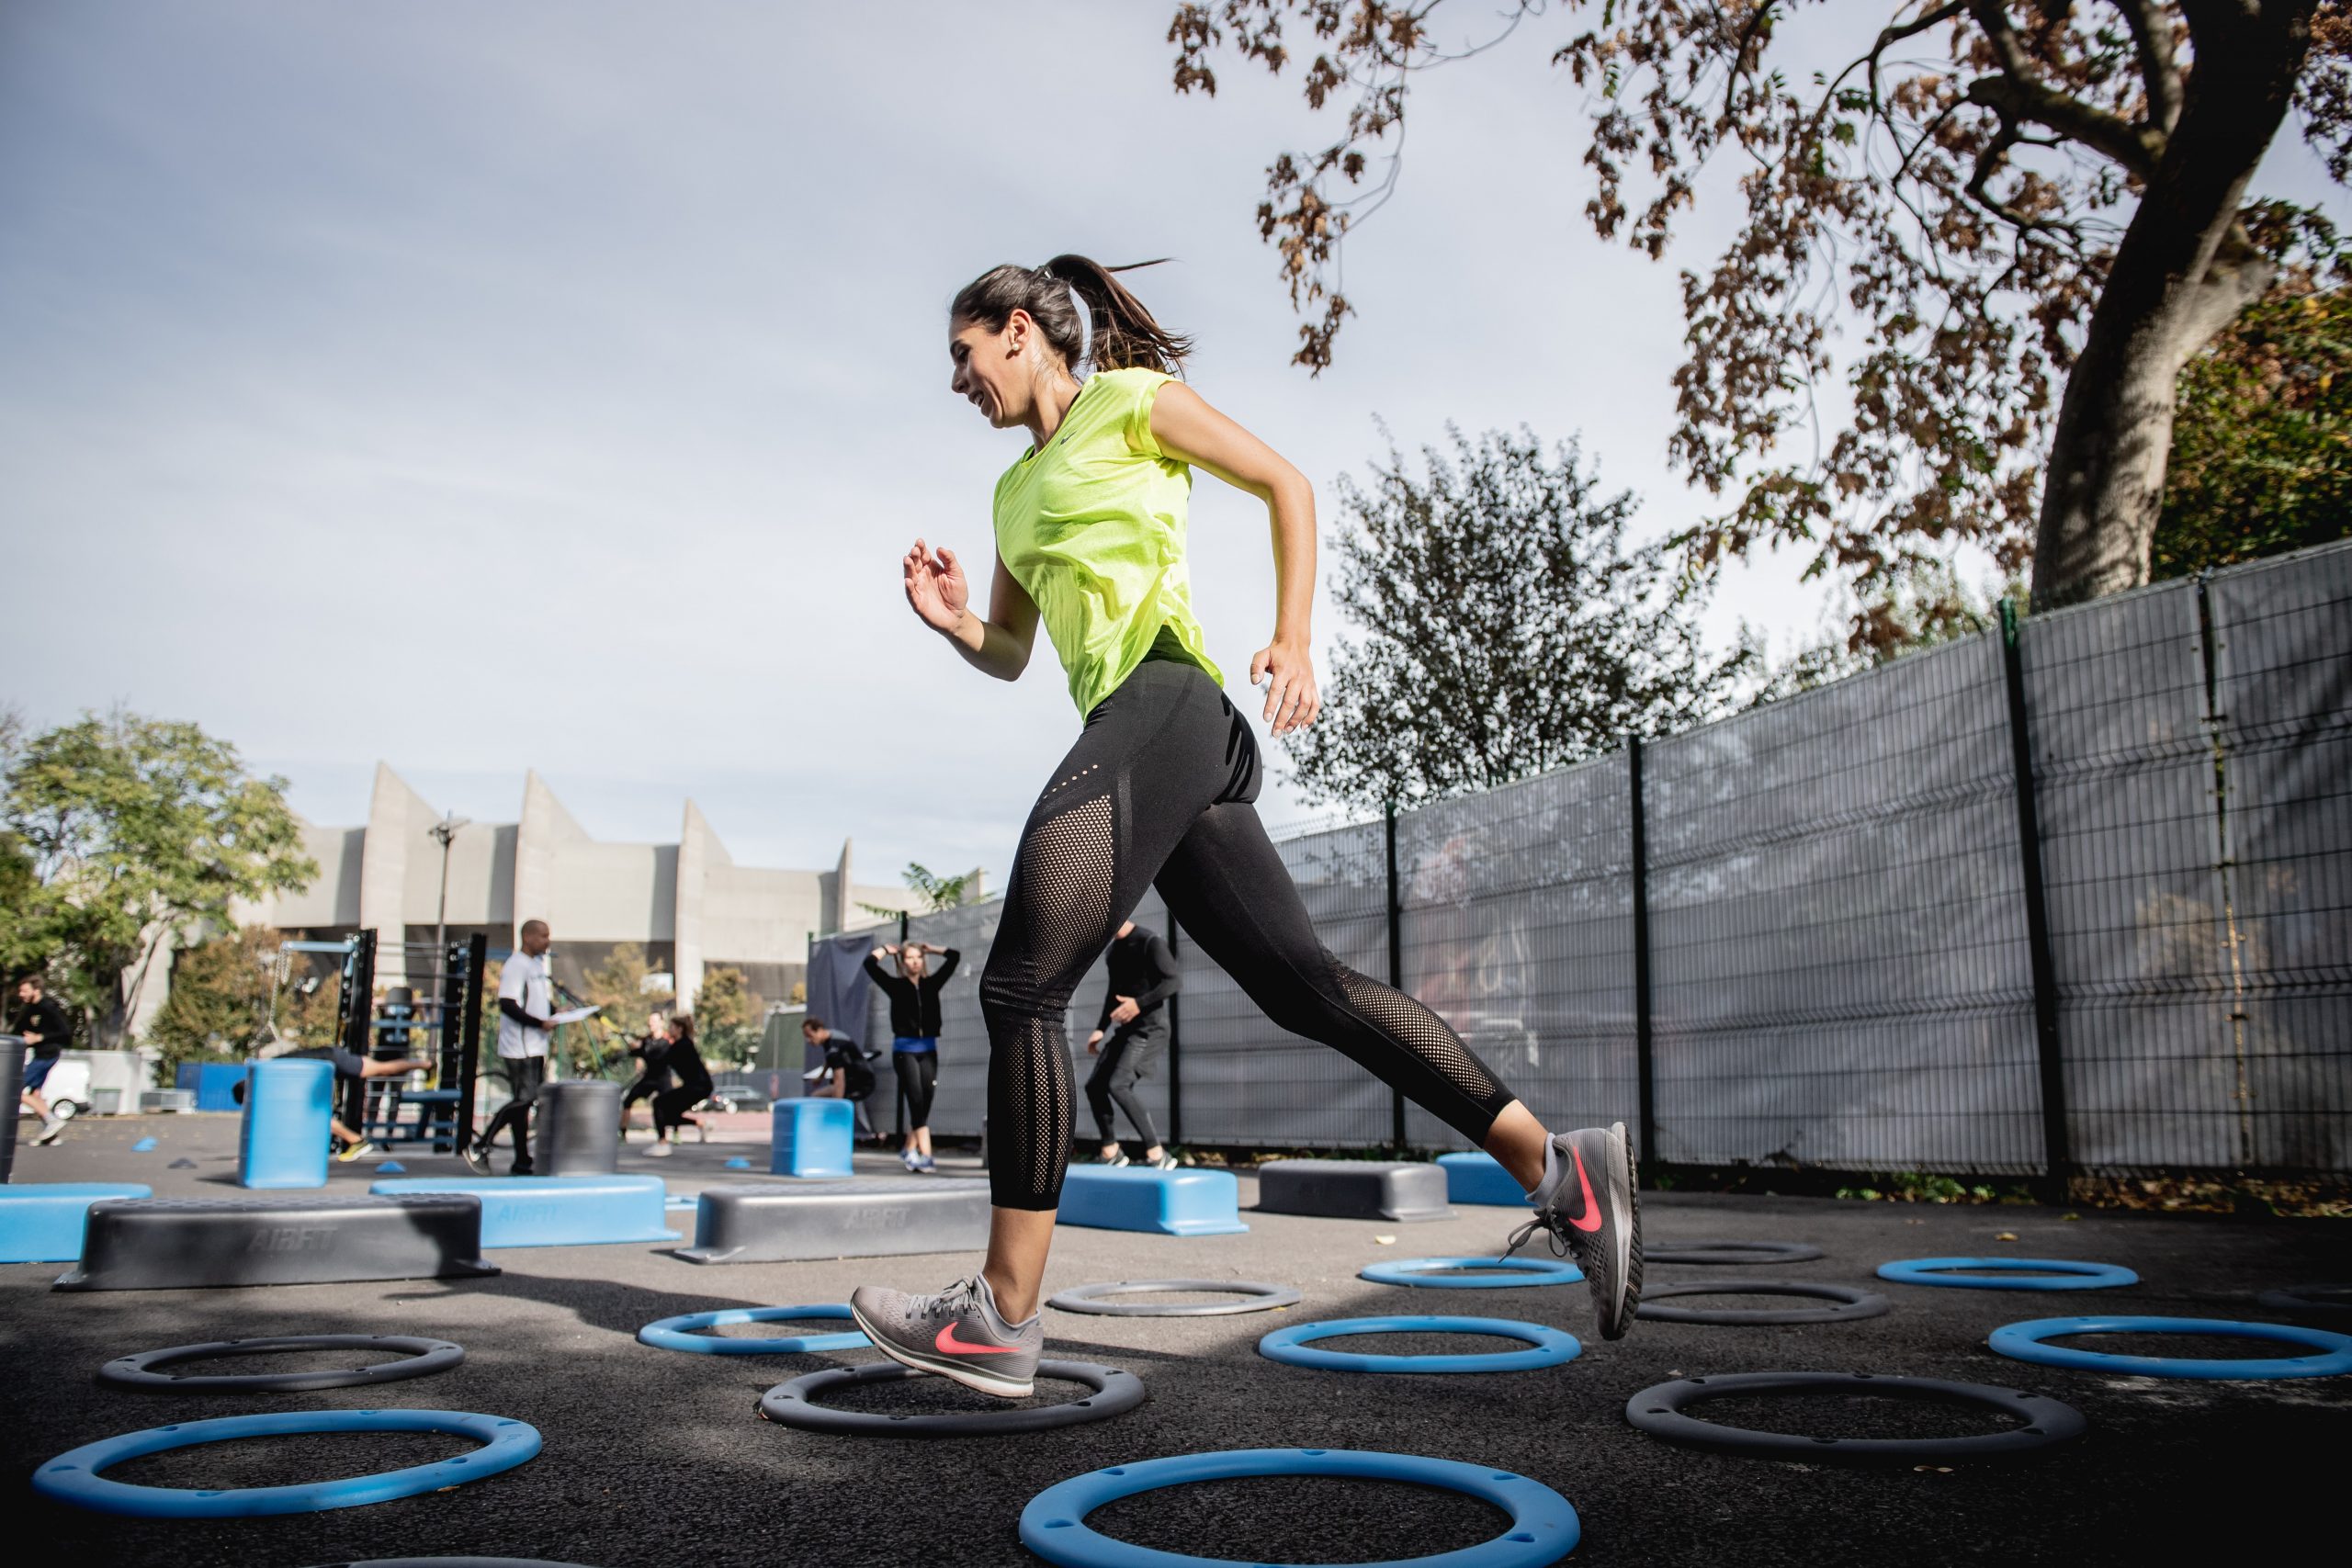 A young woman agility training with blue hoops on the ground in the city.